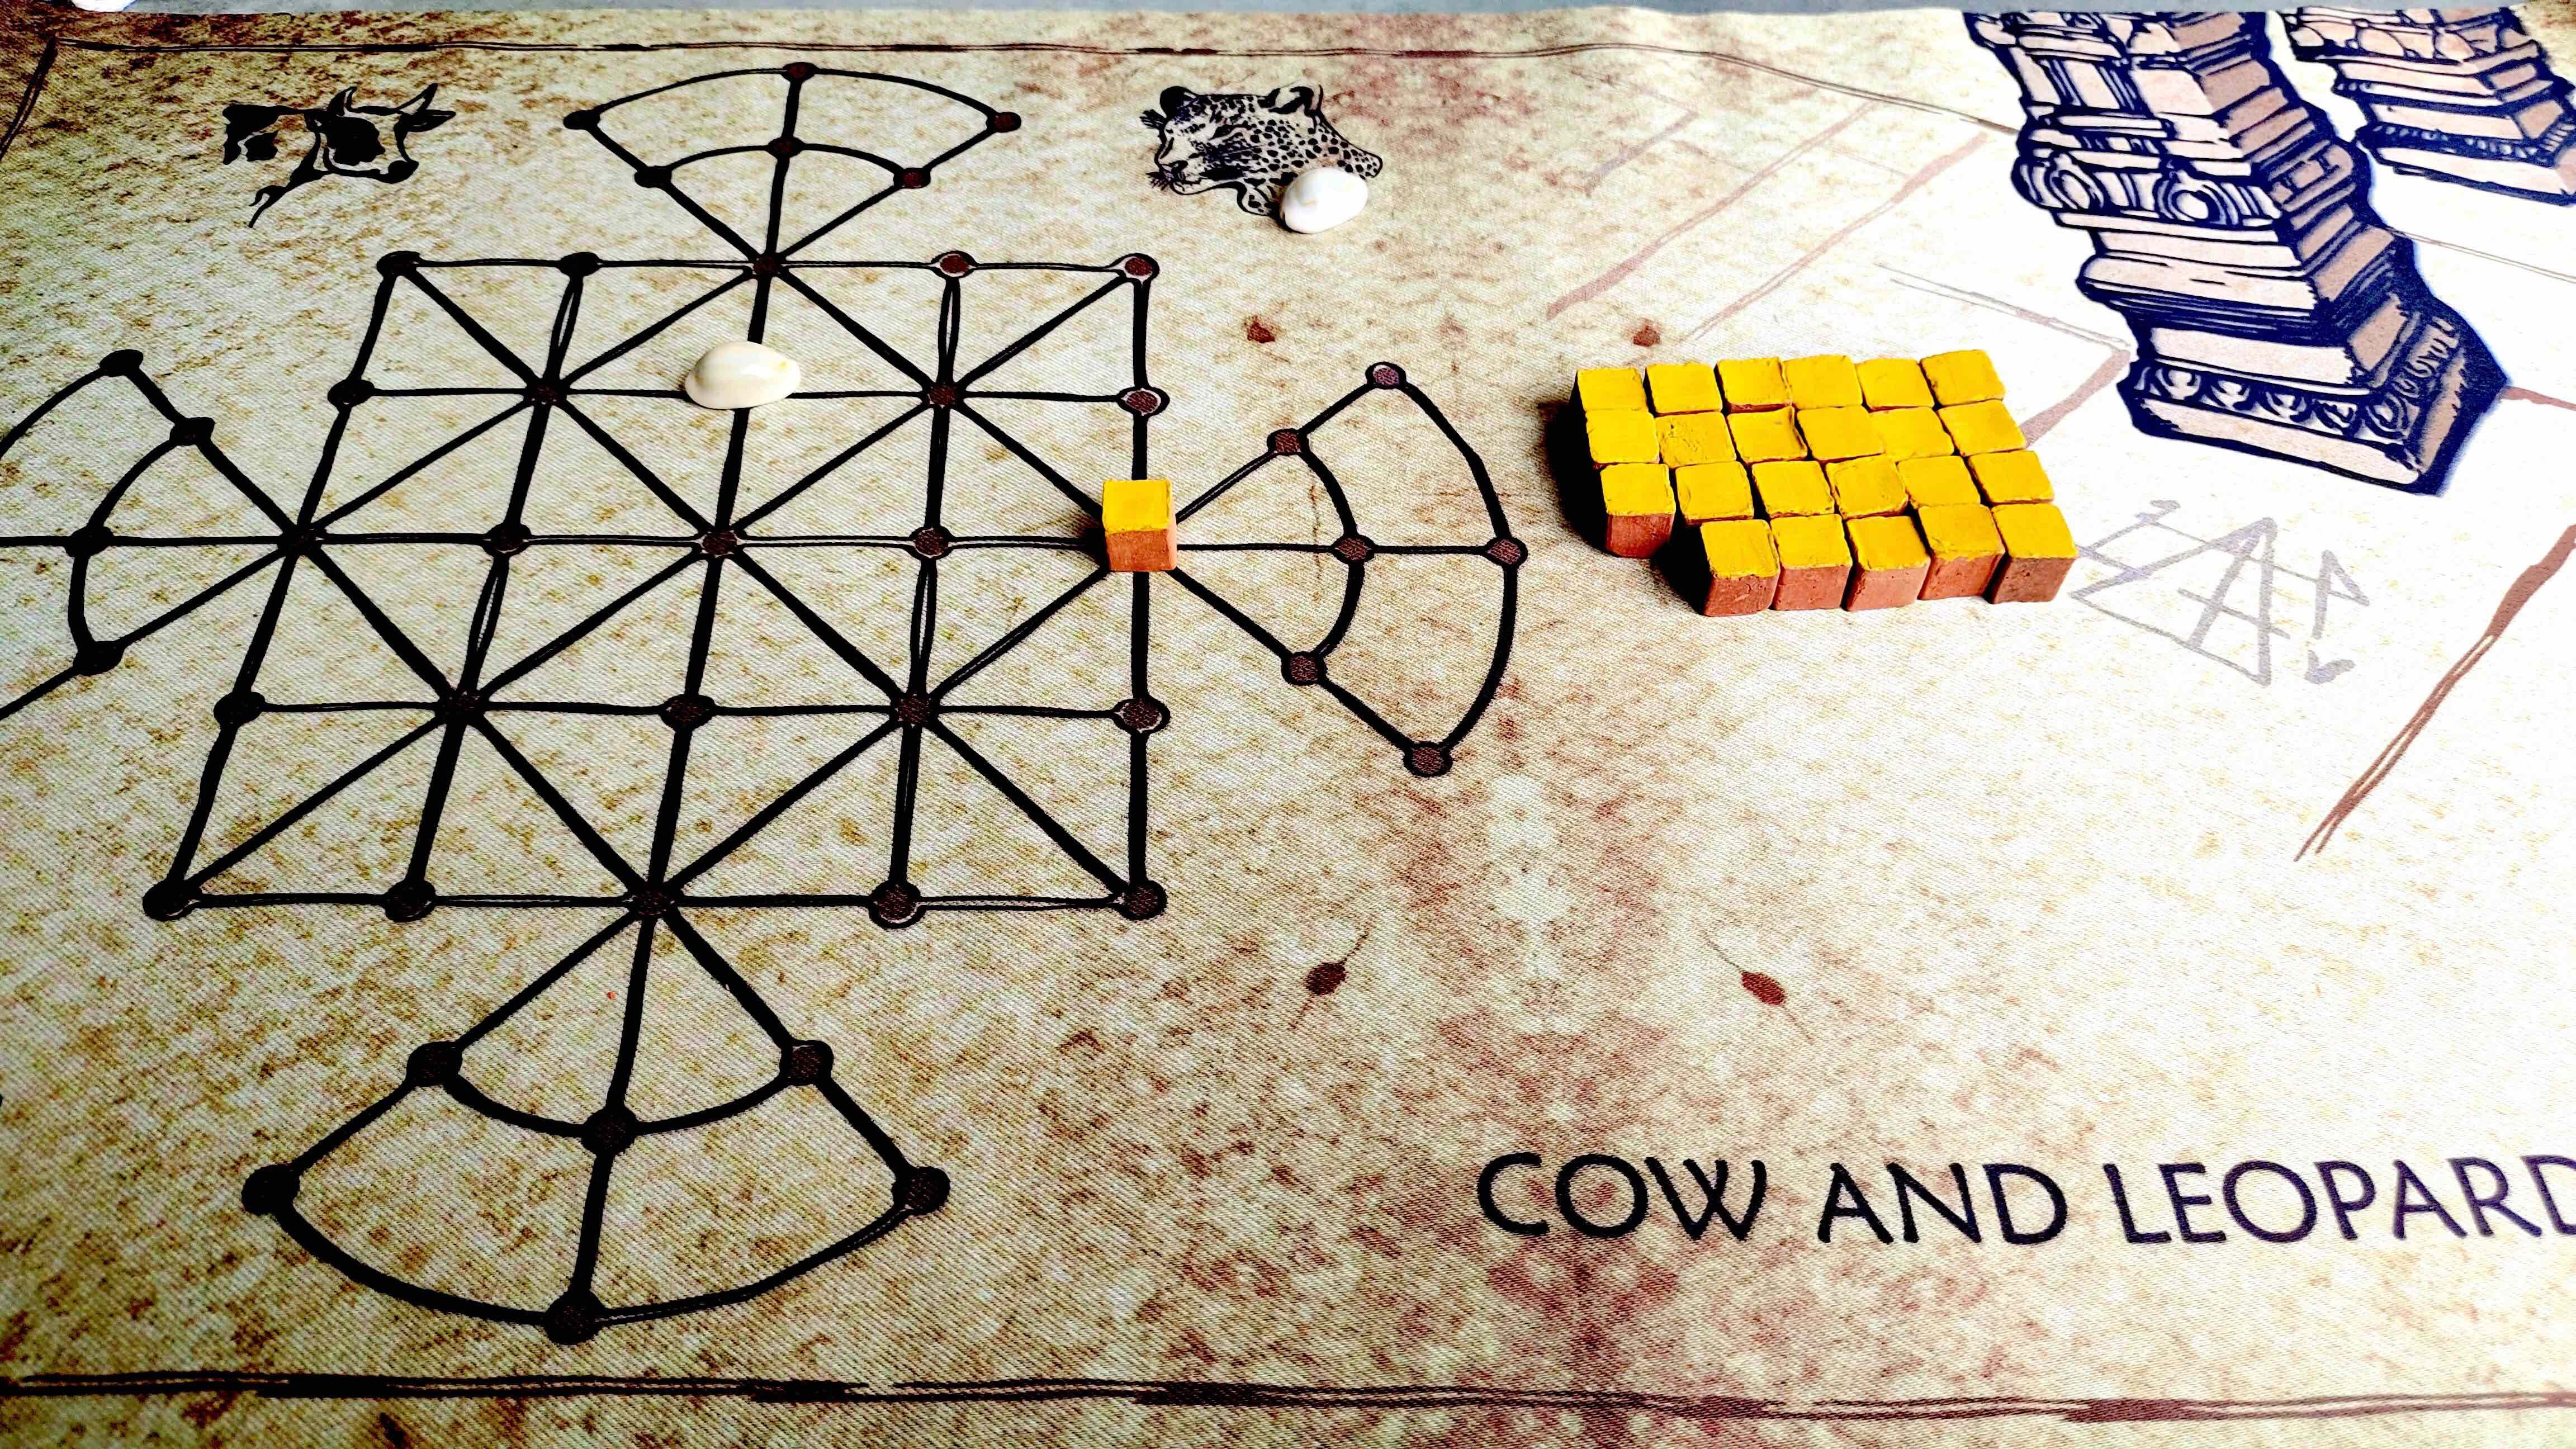 Cow & Leopard Game Set (Temple series Scroll)